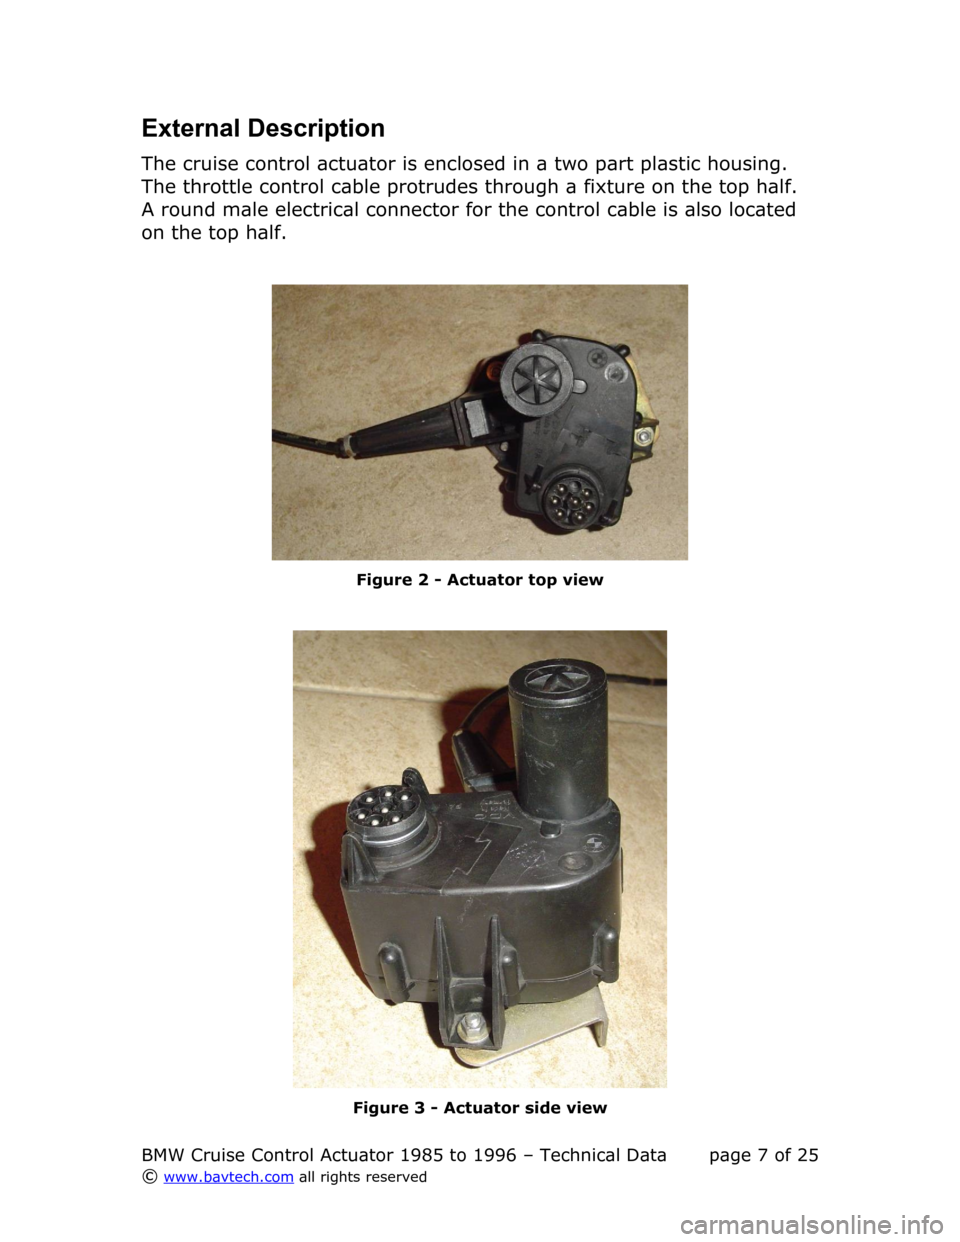 BMW 3 SERIES 1996 E36 Cruise Control Acutator External Description
The cruise control actuator is enclosed in a two part plastic housing.  
The throttle control cable protrudes through a fixture on the top half.  
A round male electrical connecto